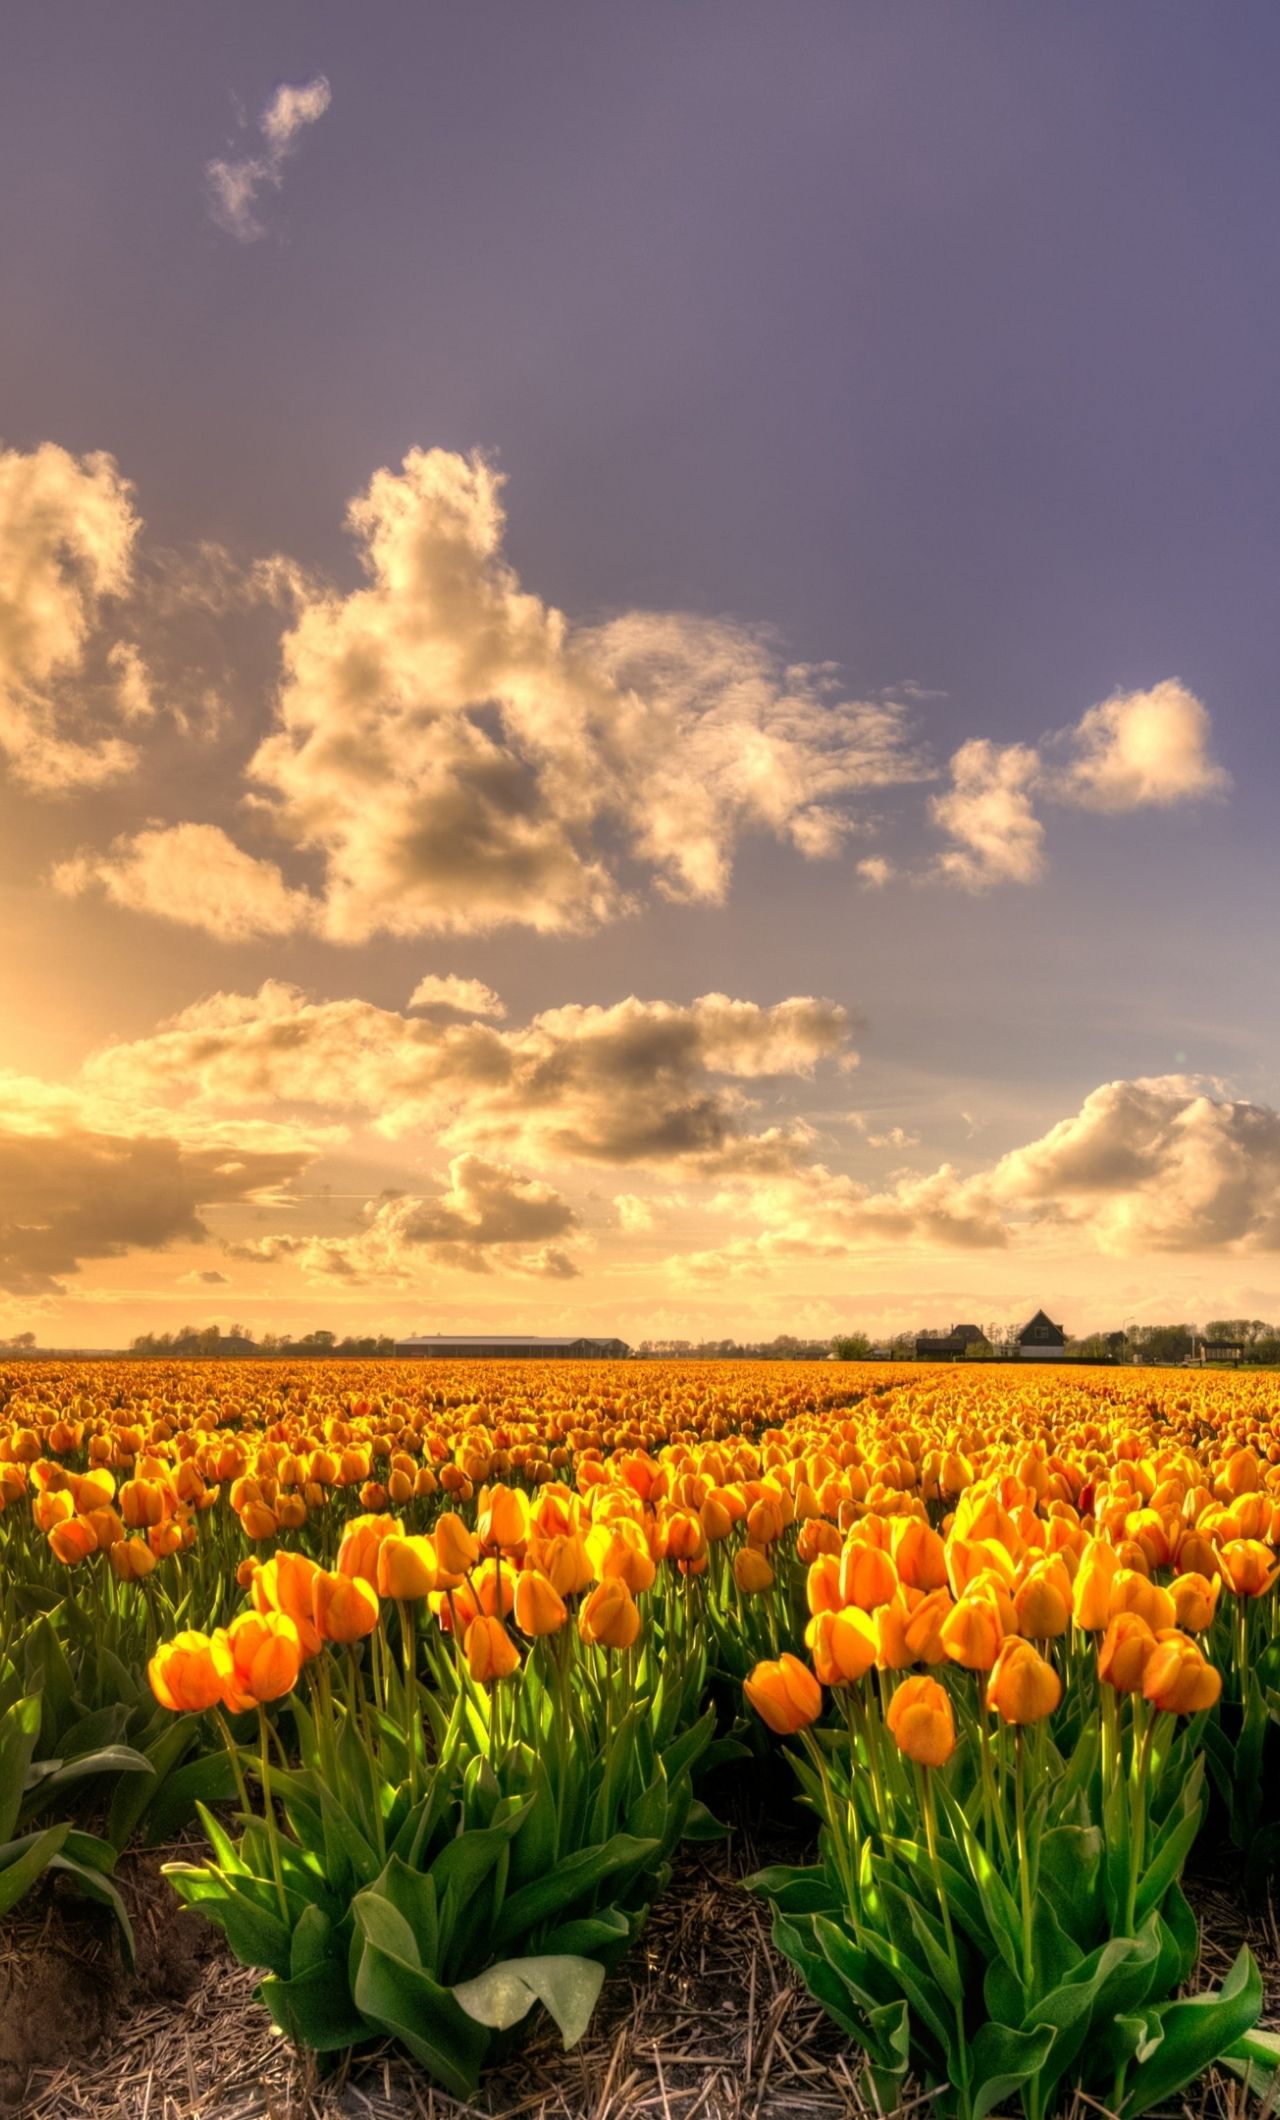 A field of flowers with clouds in the background - Tulip